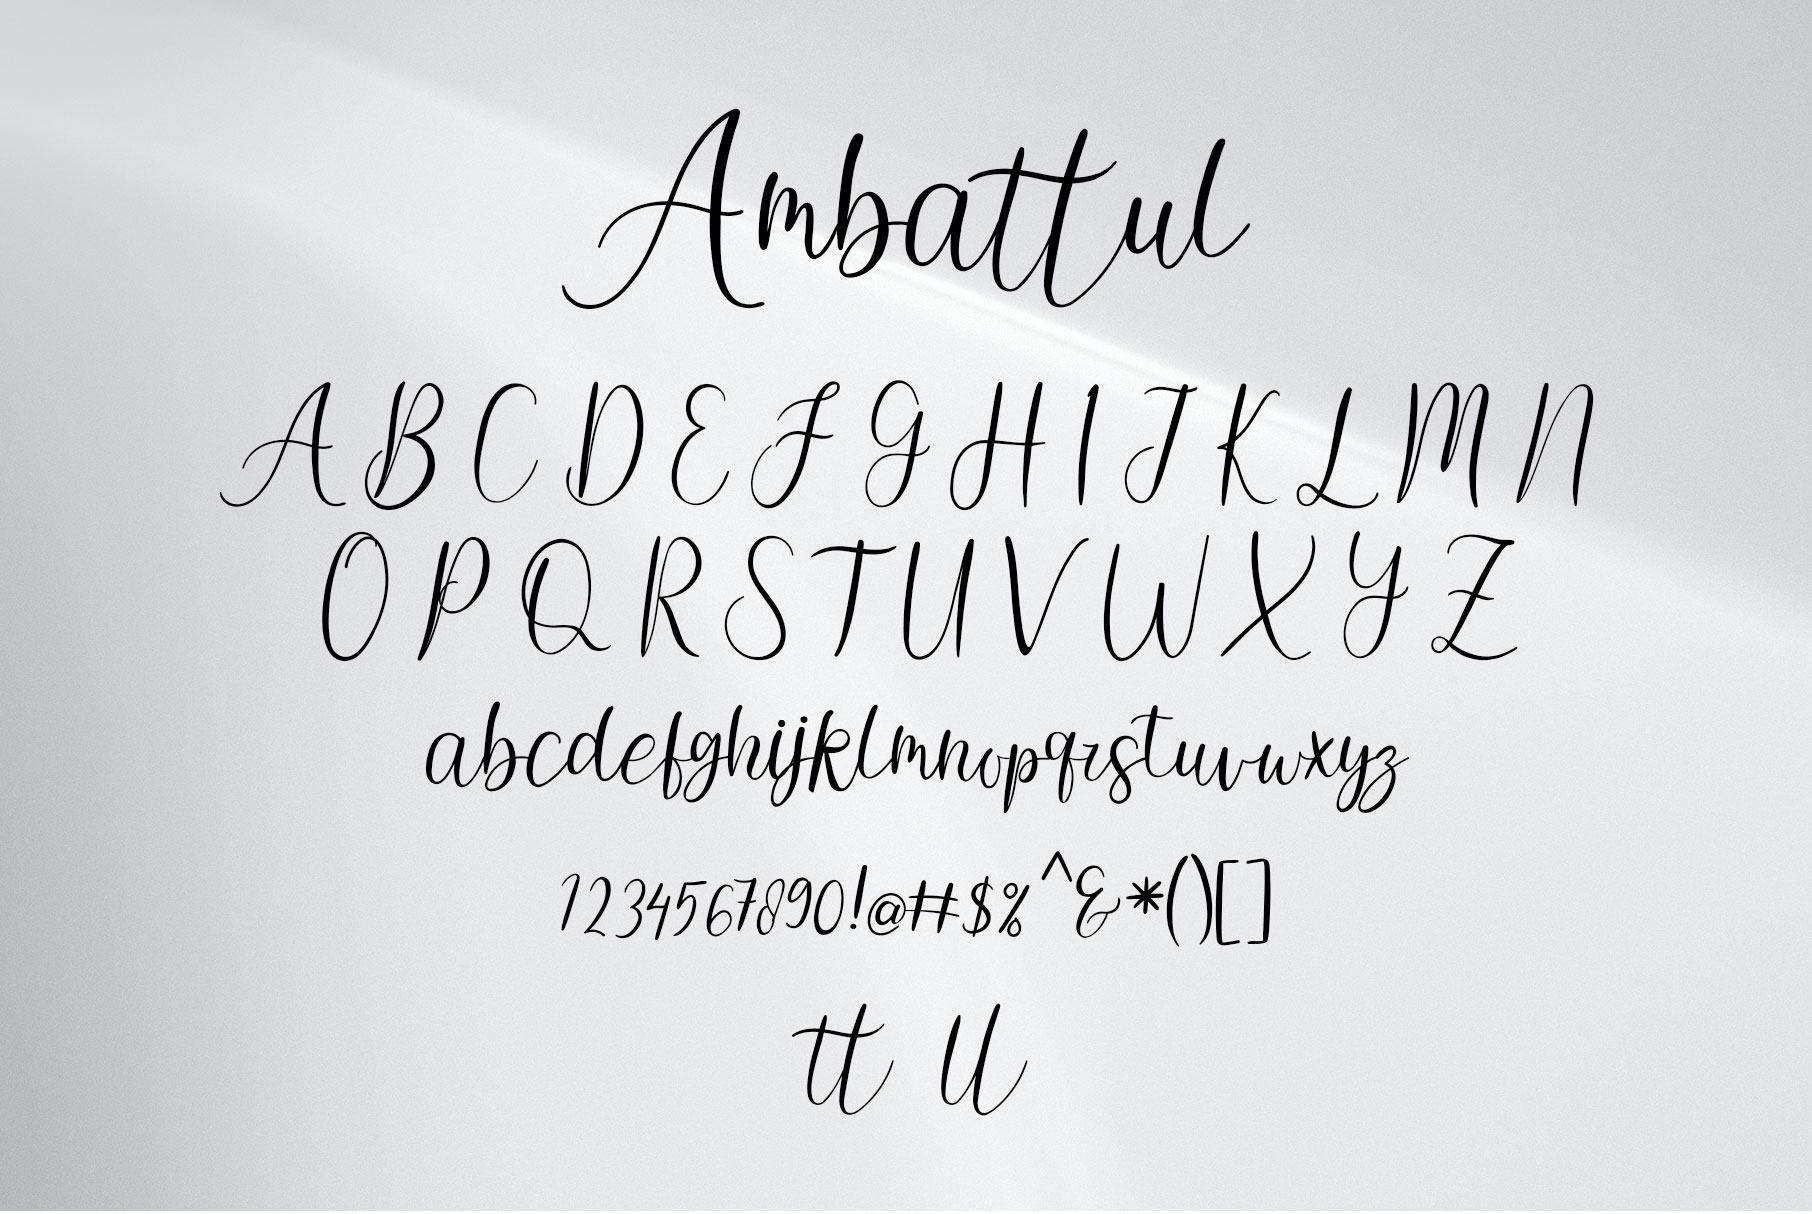 Image with symbols and letters of beautiful Ambattul font